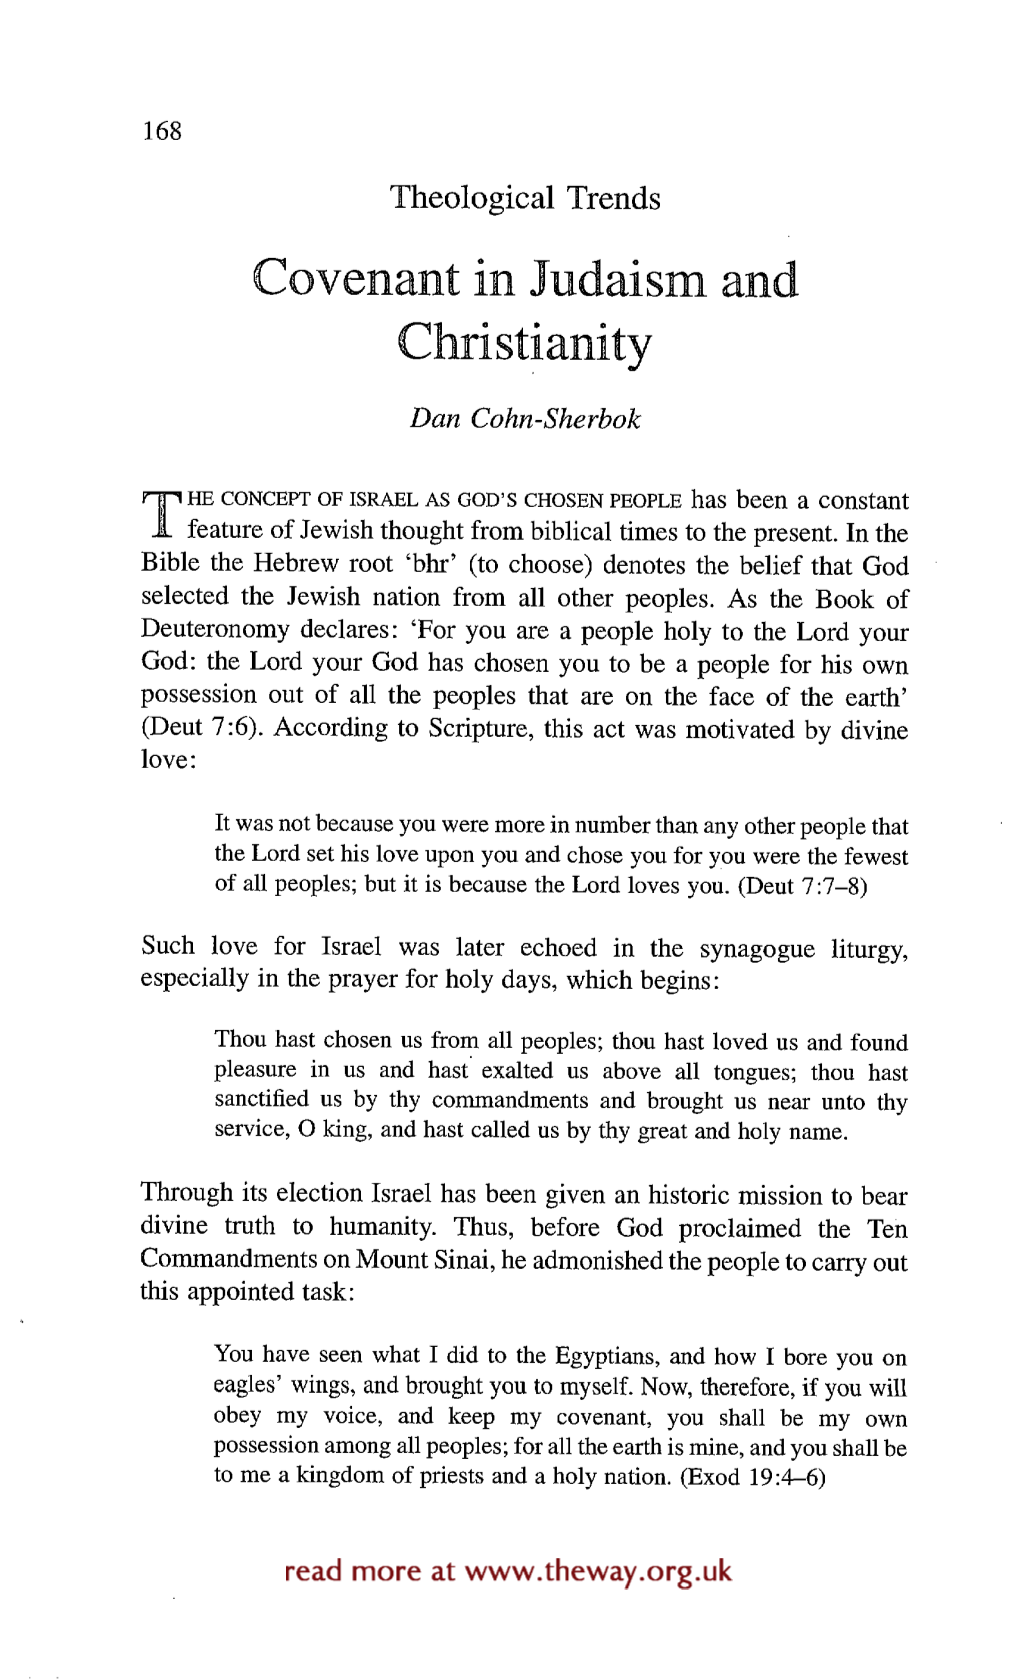 Covenant in Judaism and Christianity